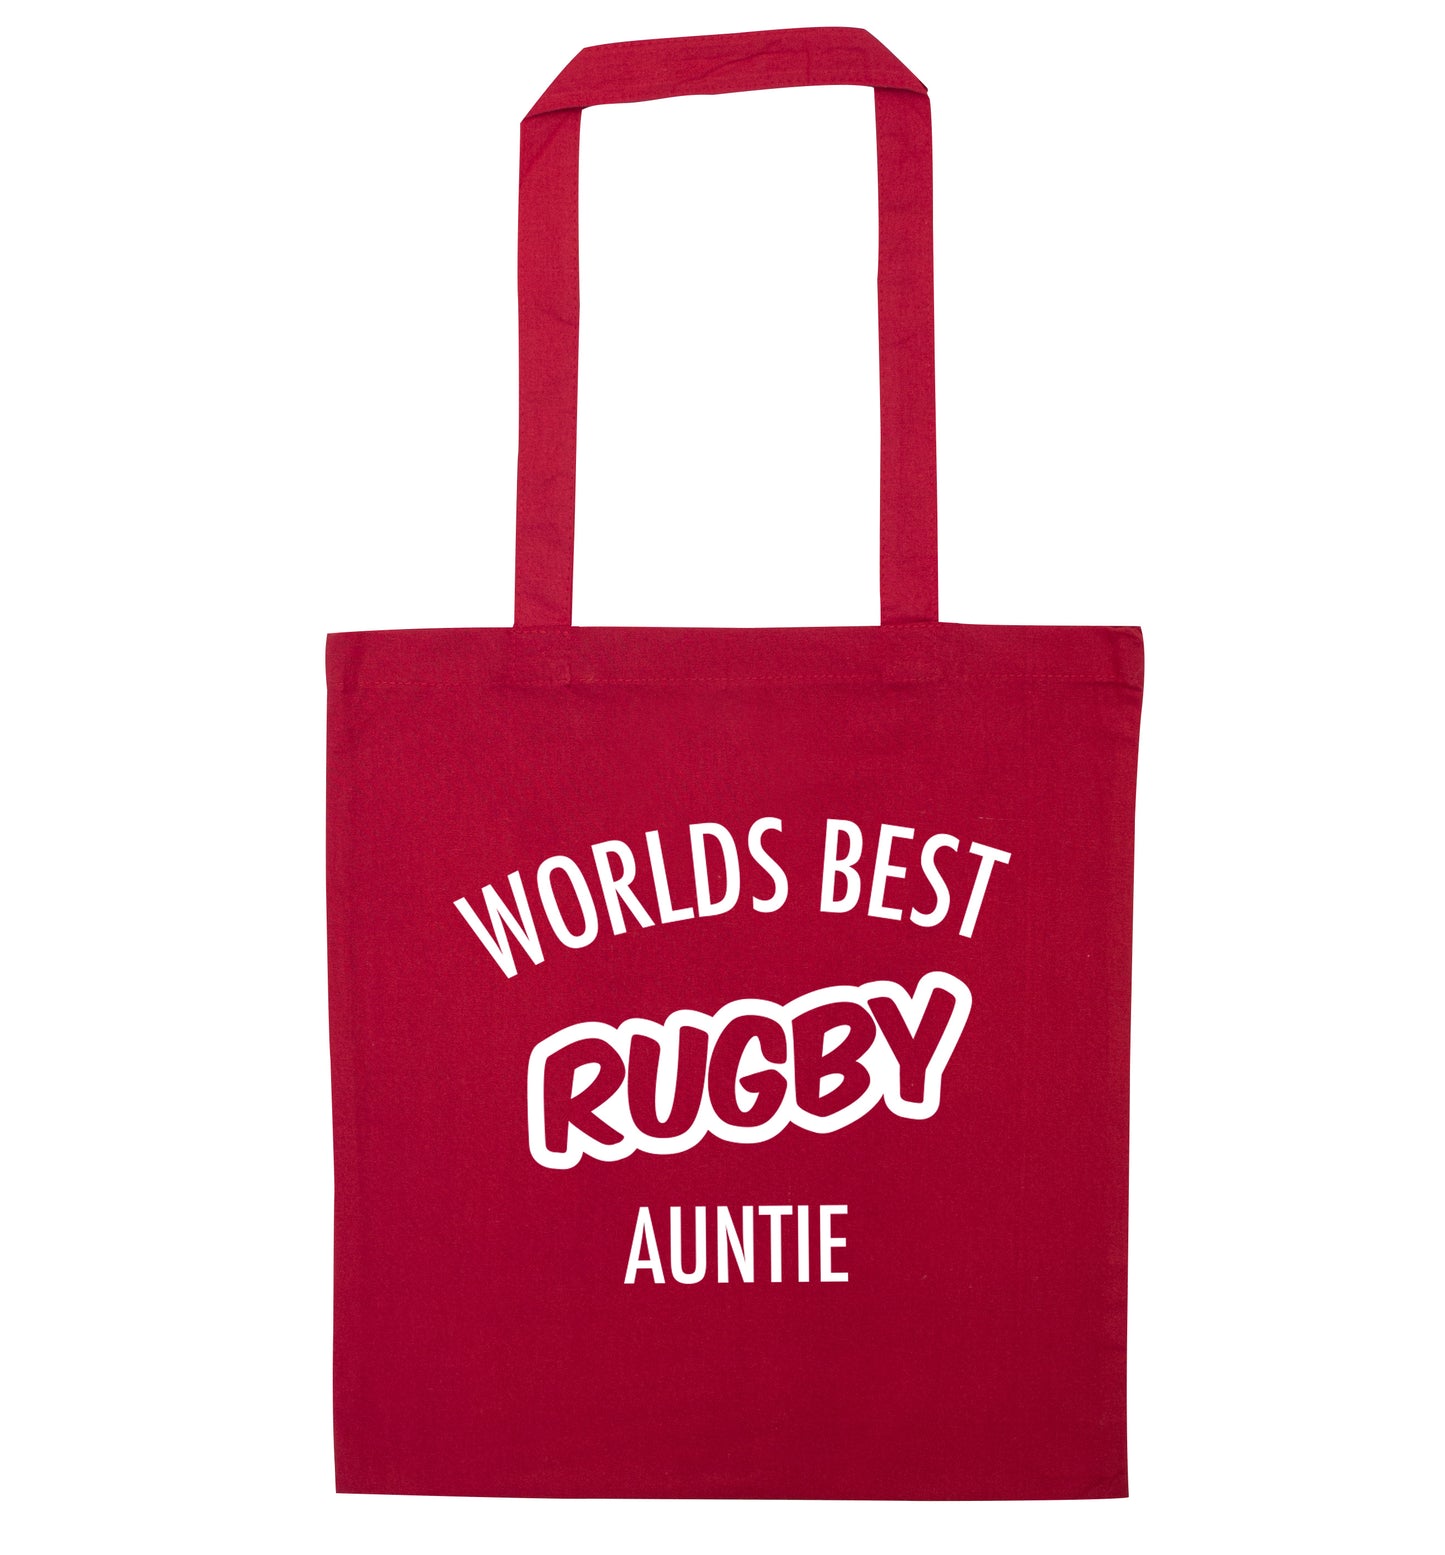 Worlds best rugby auntie red tote bag